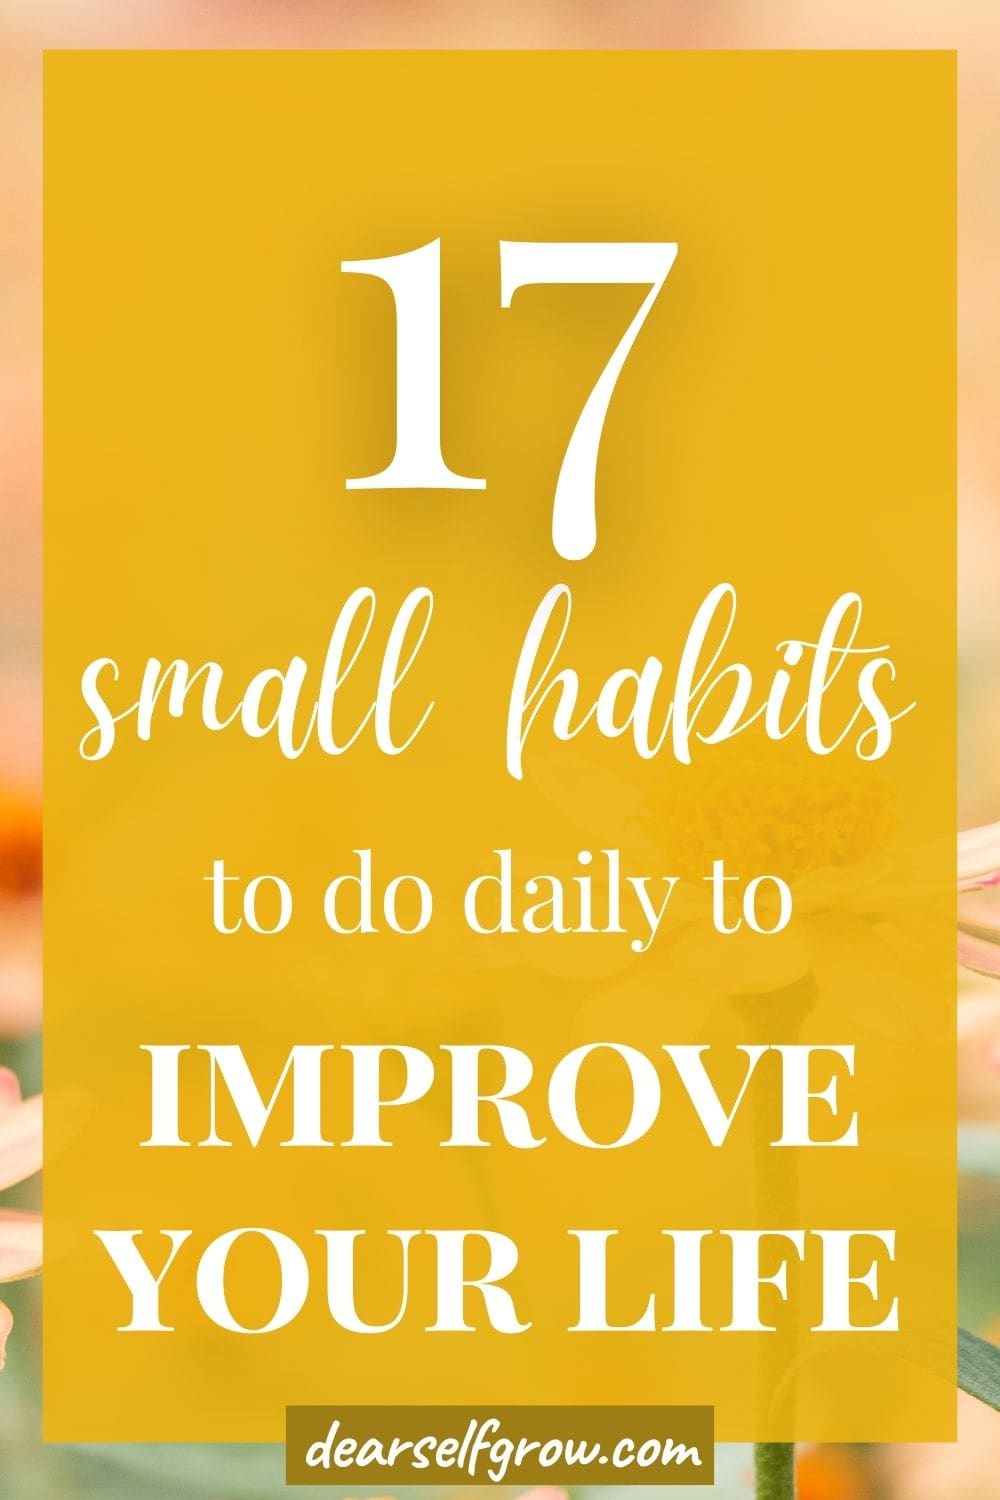 17 Small Habits To Do Daily To Improve Your Life Dear Self Grow